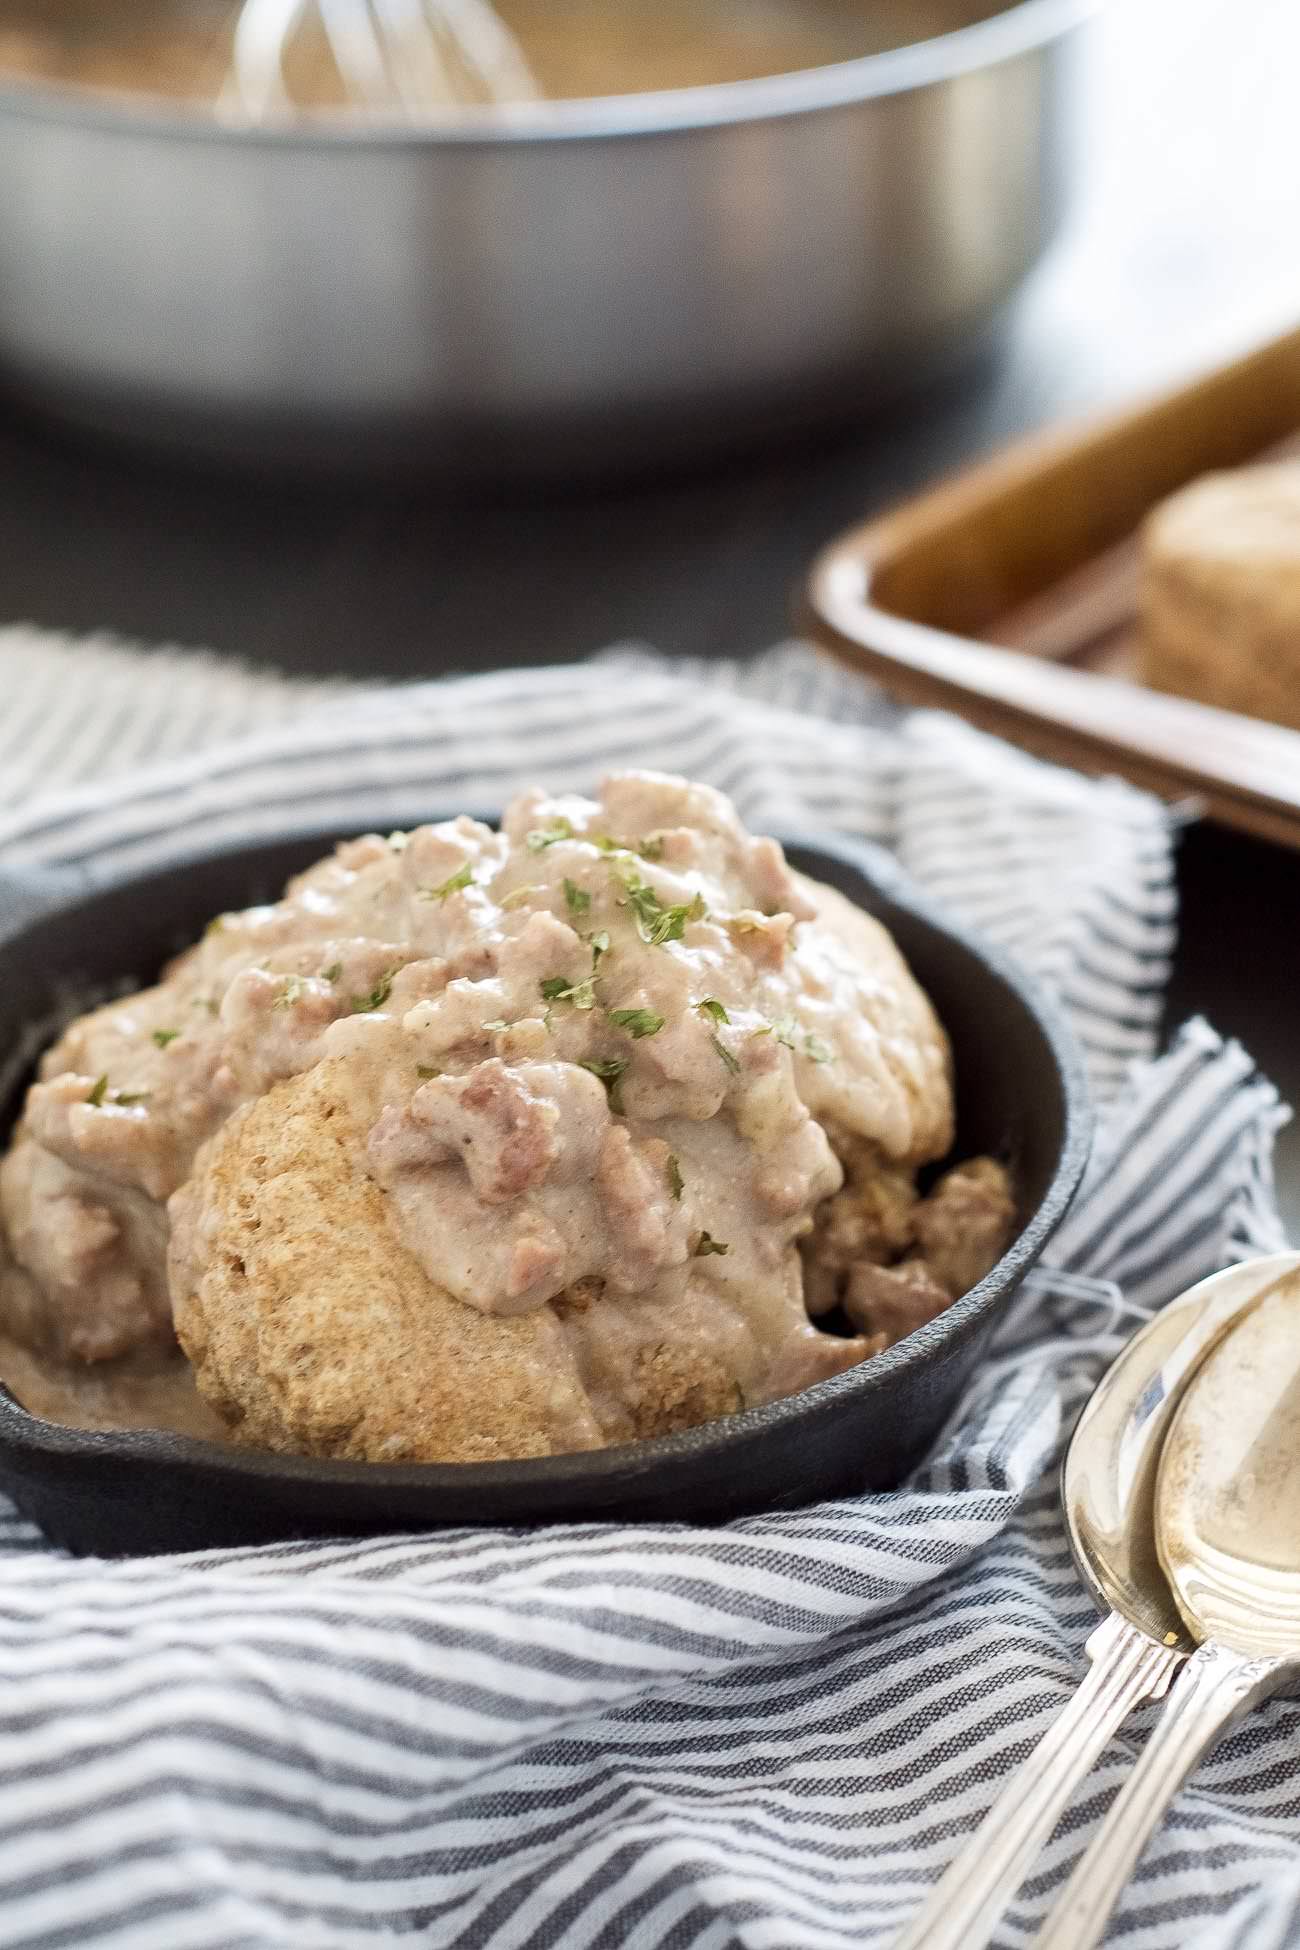 Skinny Biscuits and Gravy with Maple Sausage Gravy is a brunch favorite that has been lightened up with whole wheat biscuits, turkey sausage and a touch of maple in gravy!